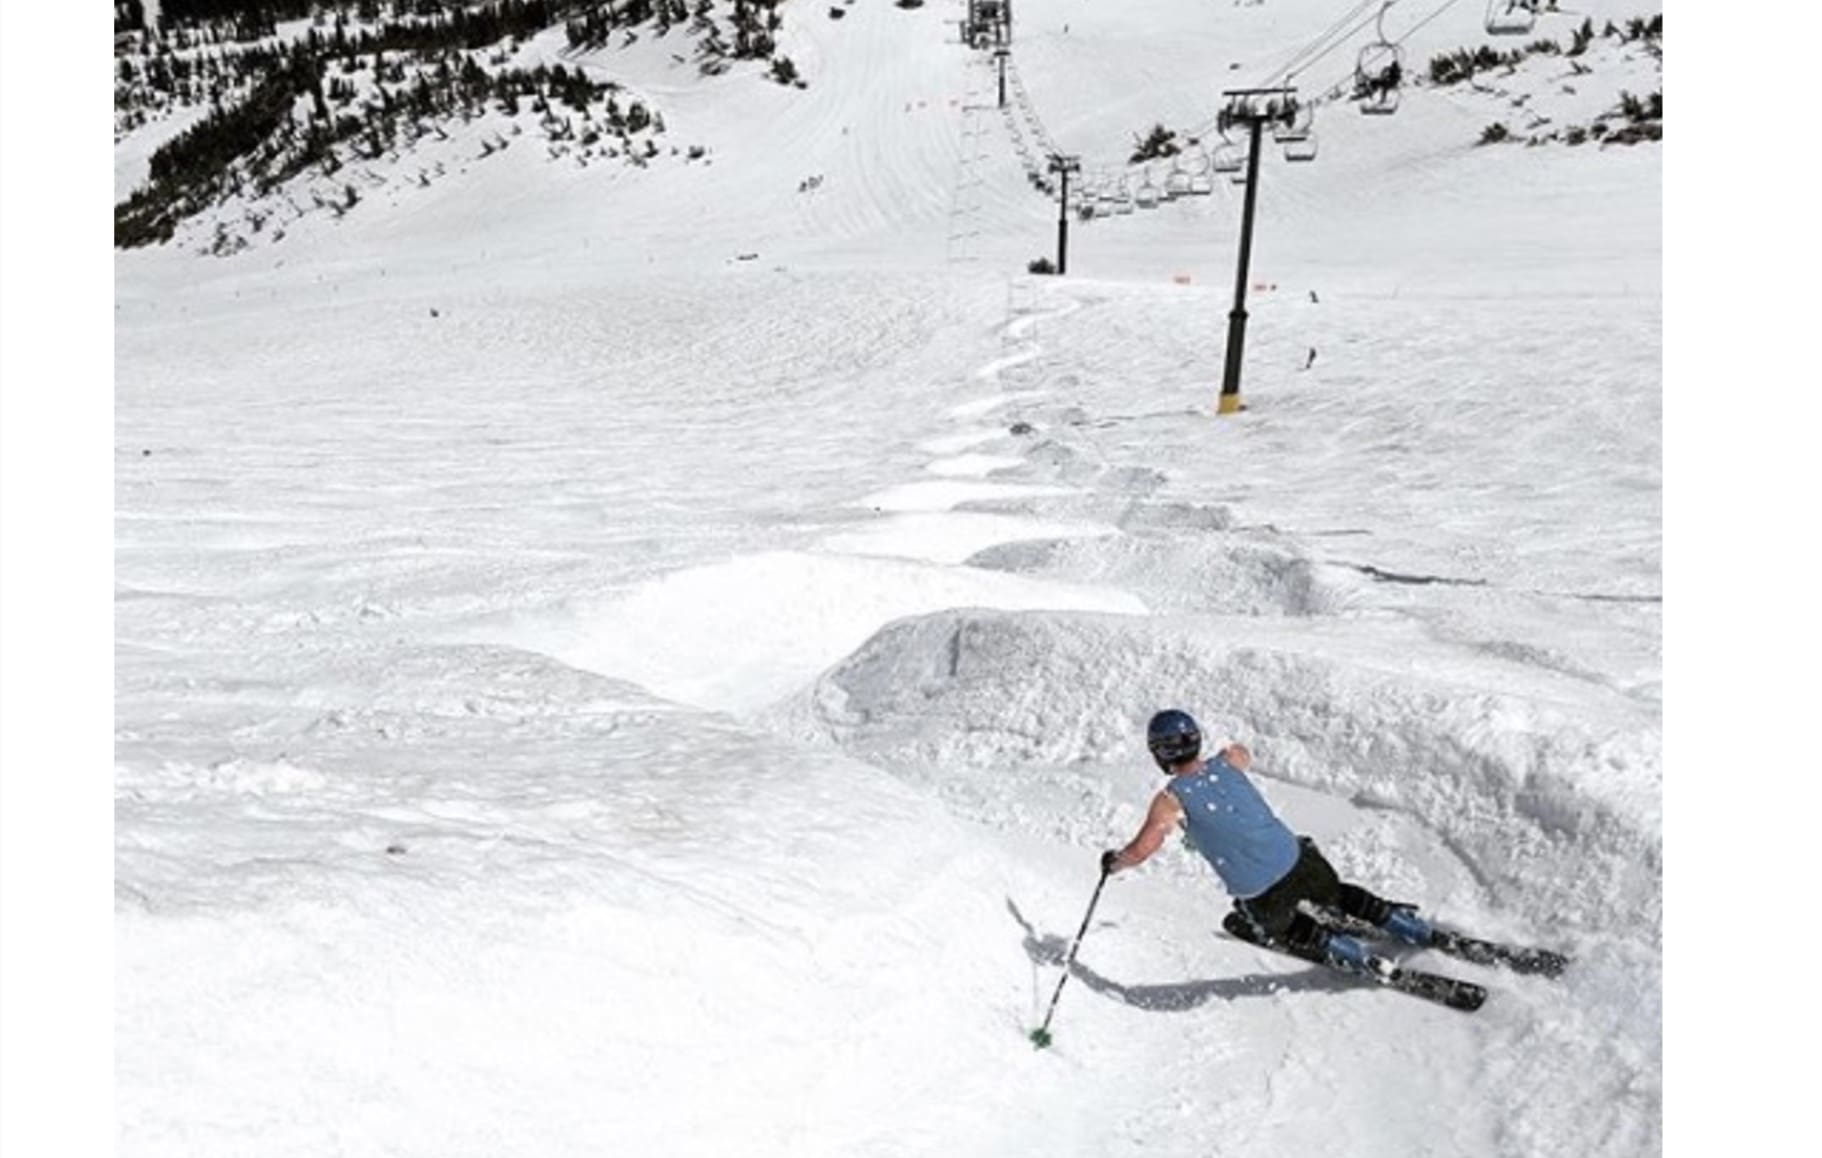 Mammoth Mountain Announced Final Closing Day (Sunday, July 28th)